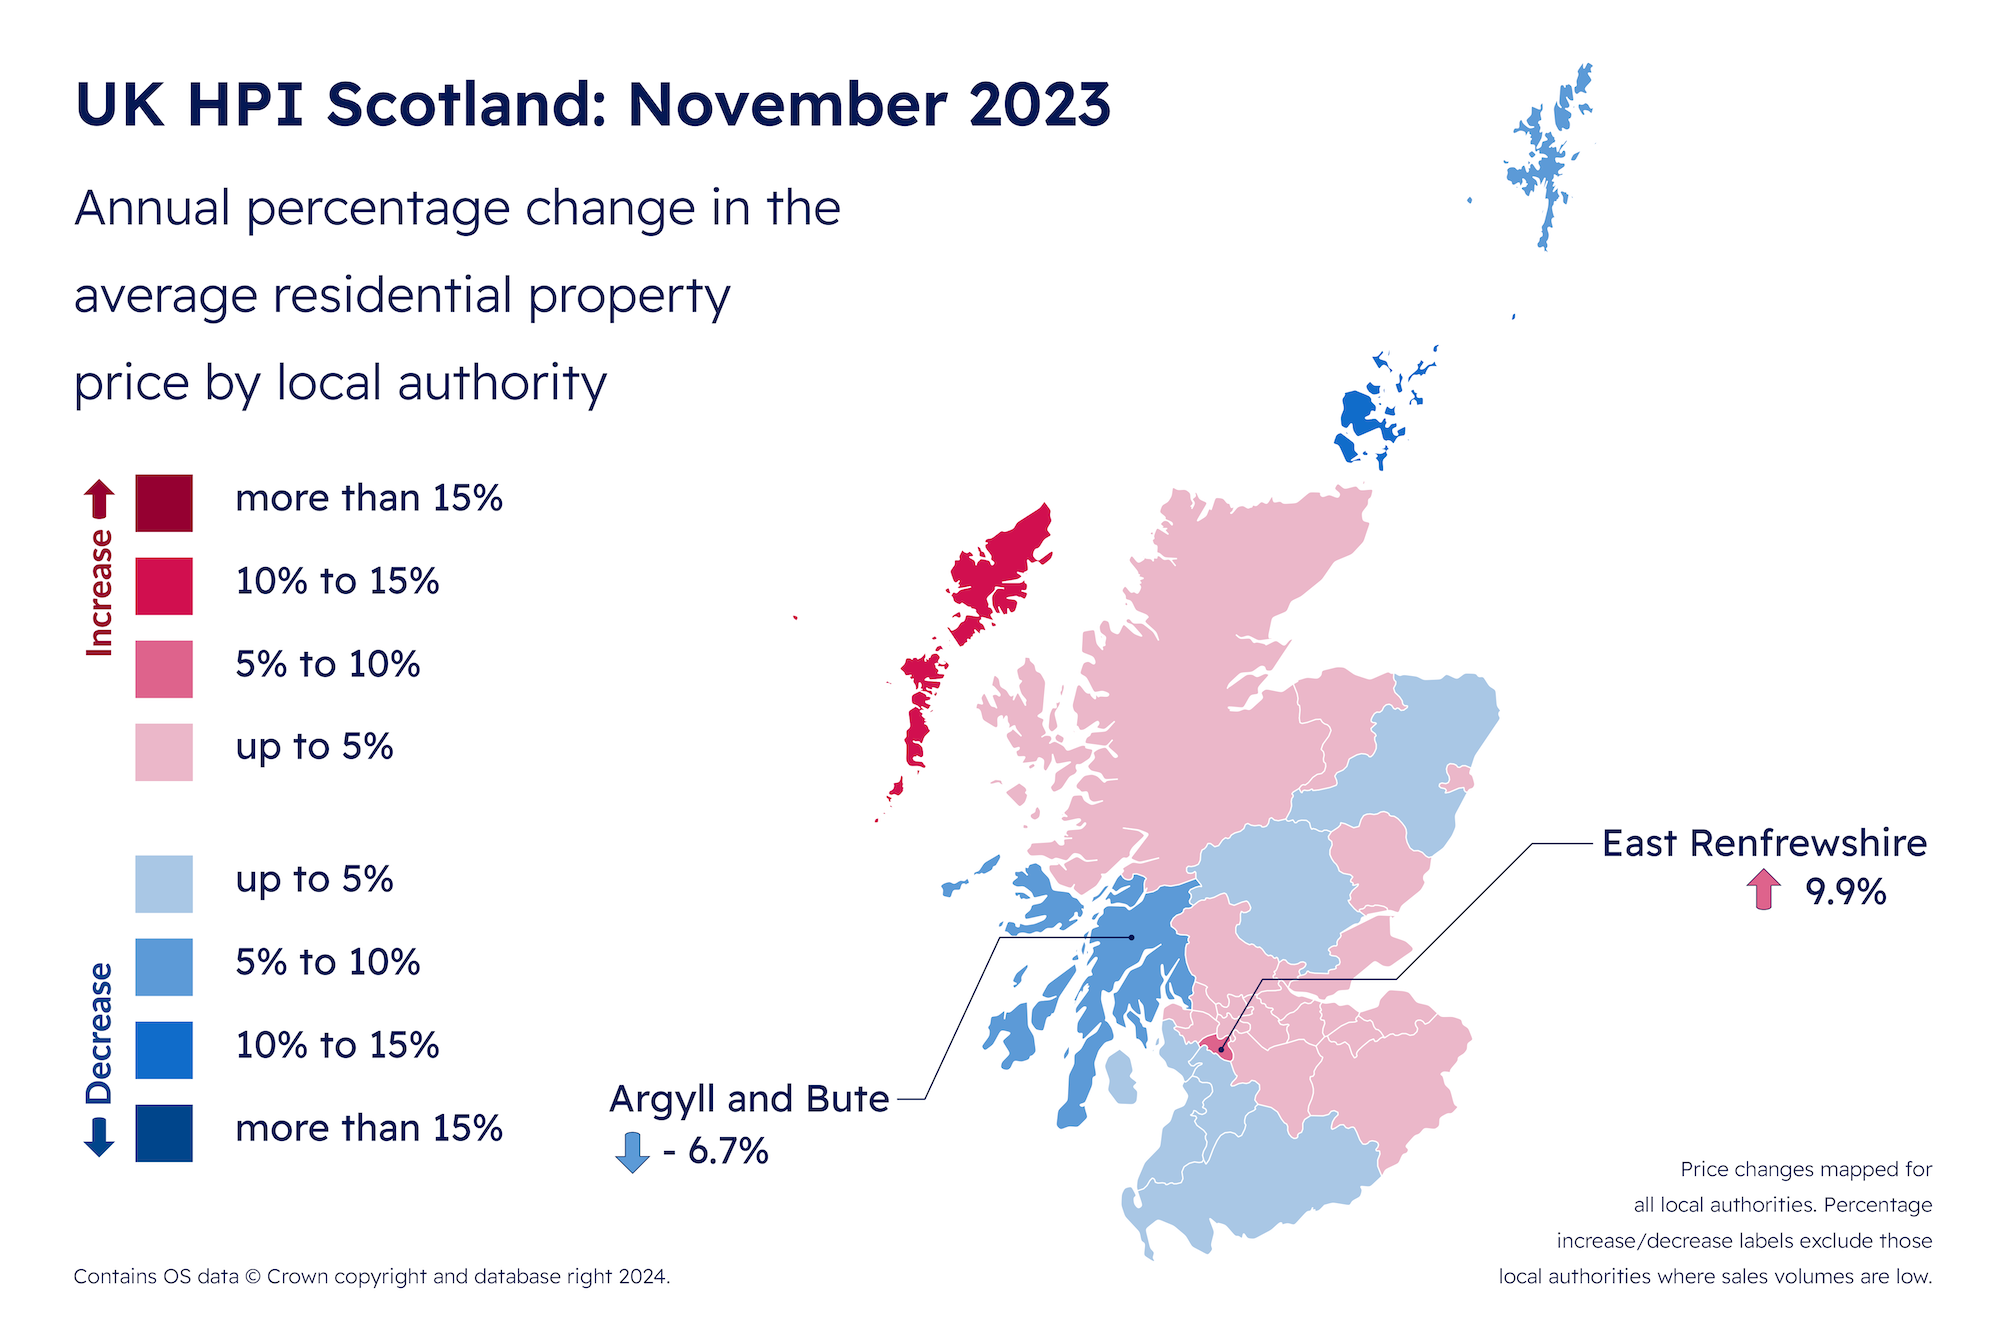 RoS: Scotland's property market sees 2.2% annual increase